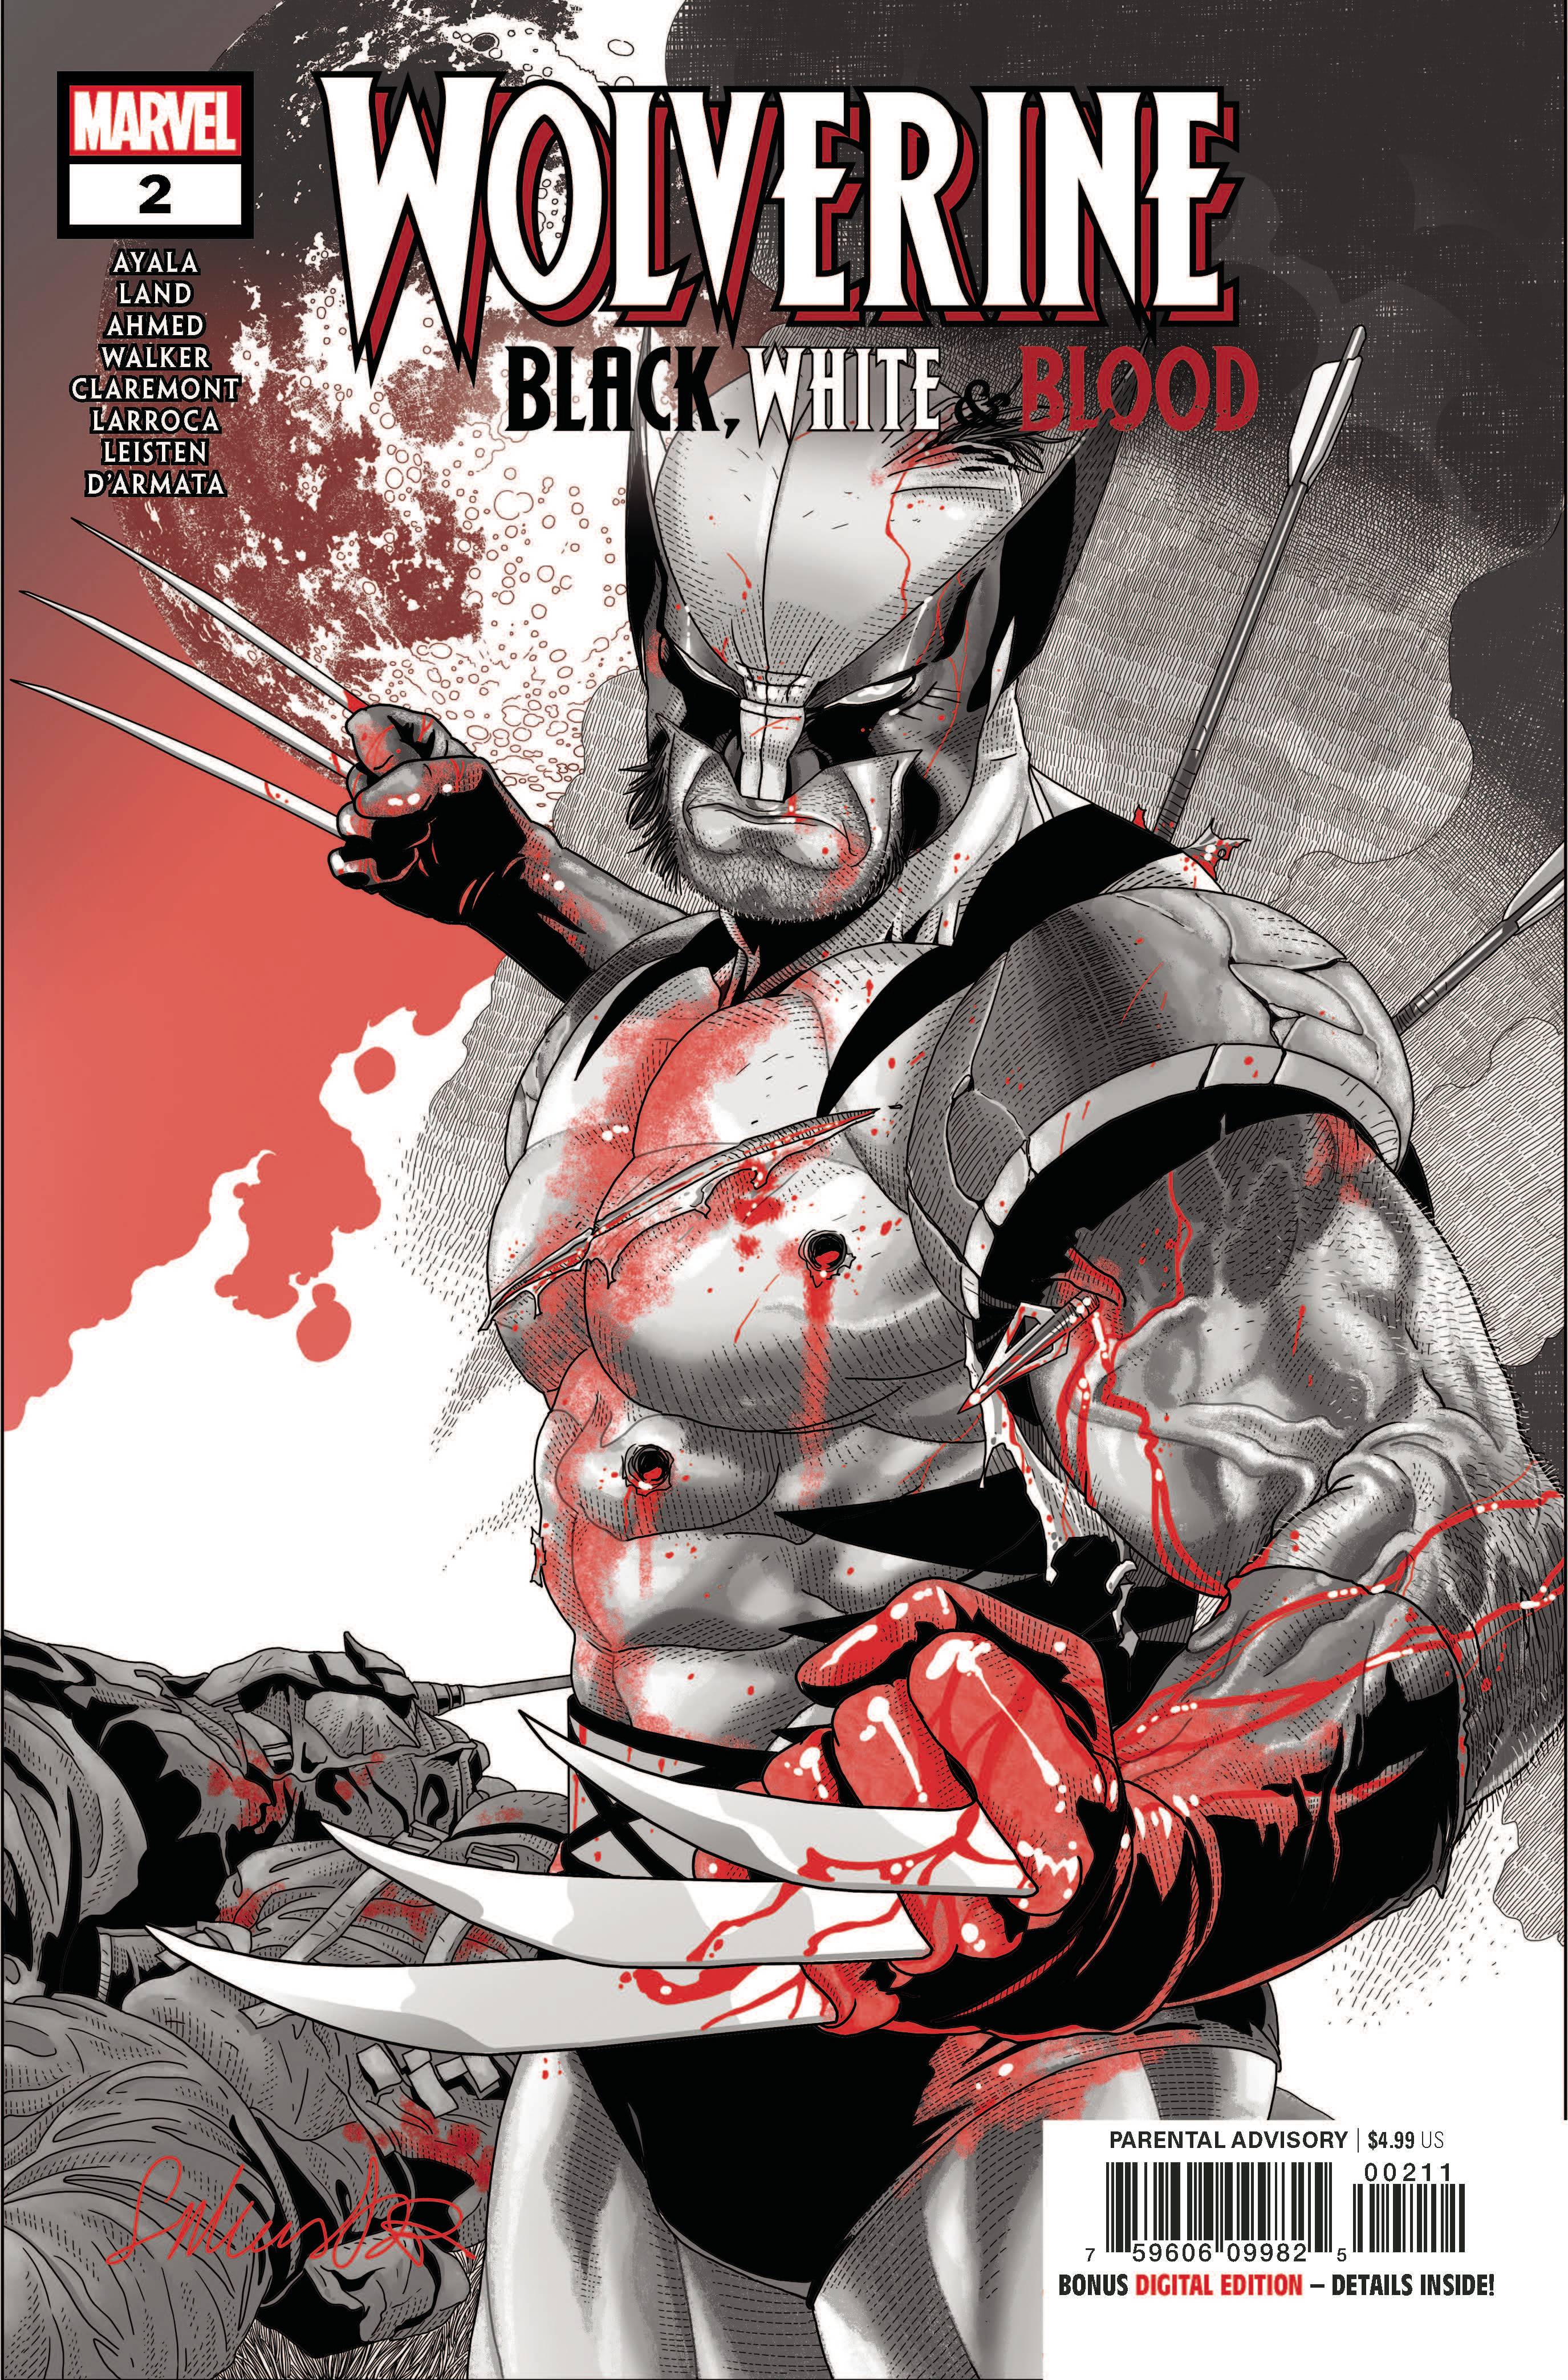 WOLVERINE BLACK WHITE BLOOD #2 (OF 4) | Game Master's Emporium (The New GME)